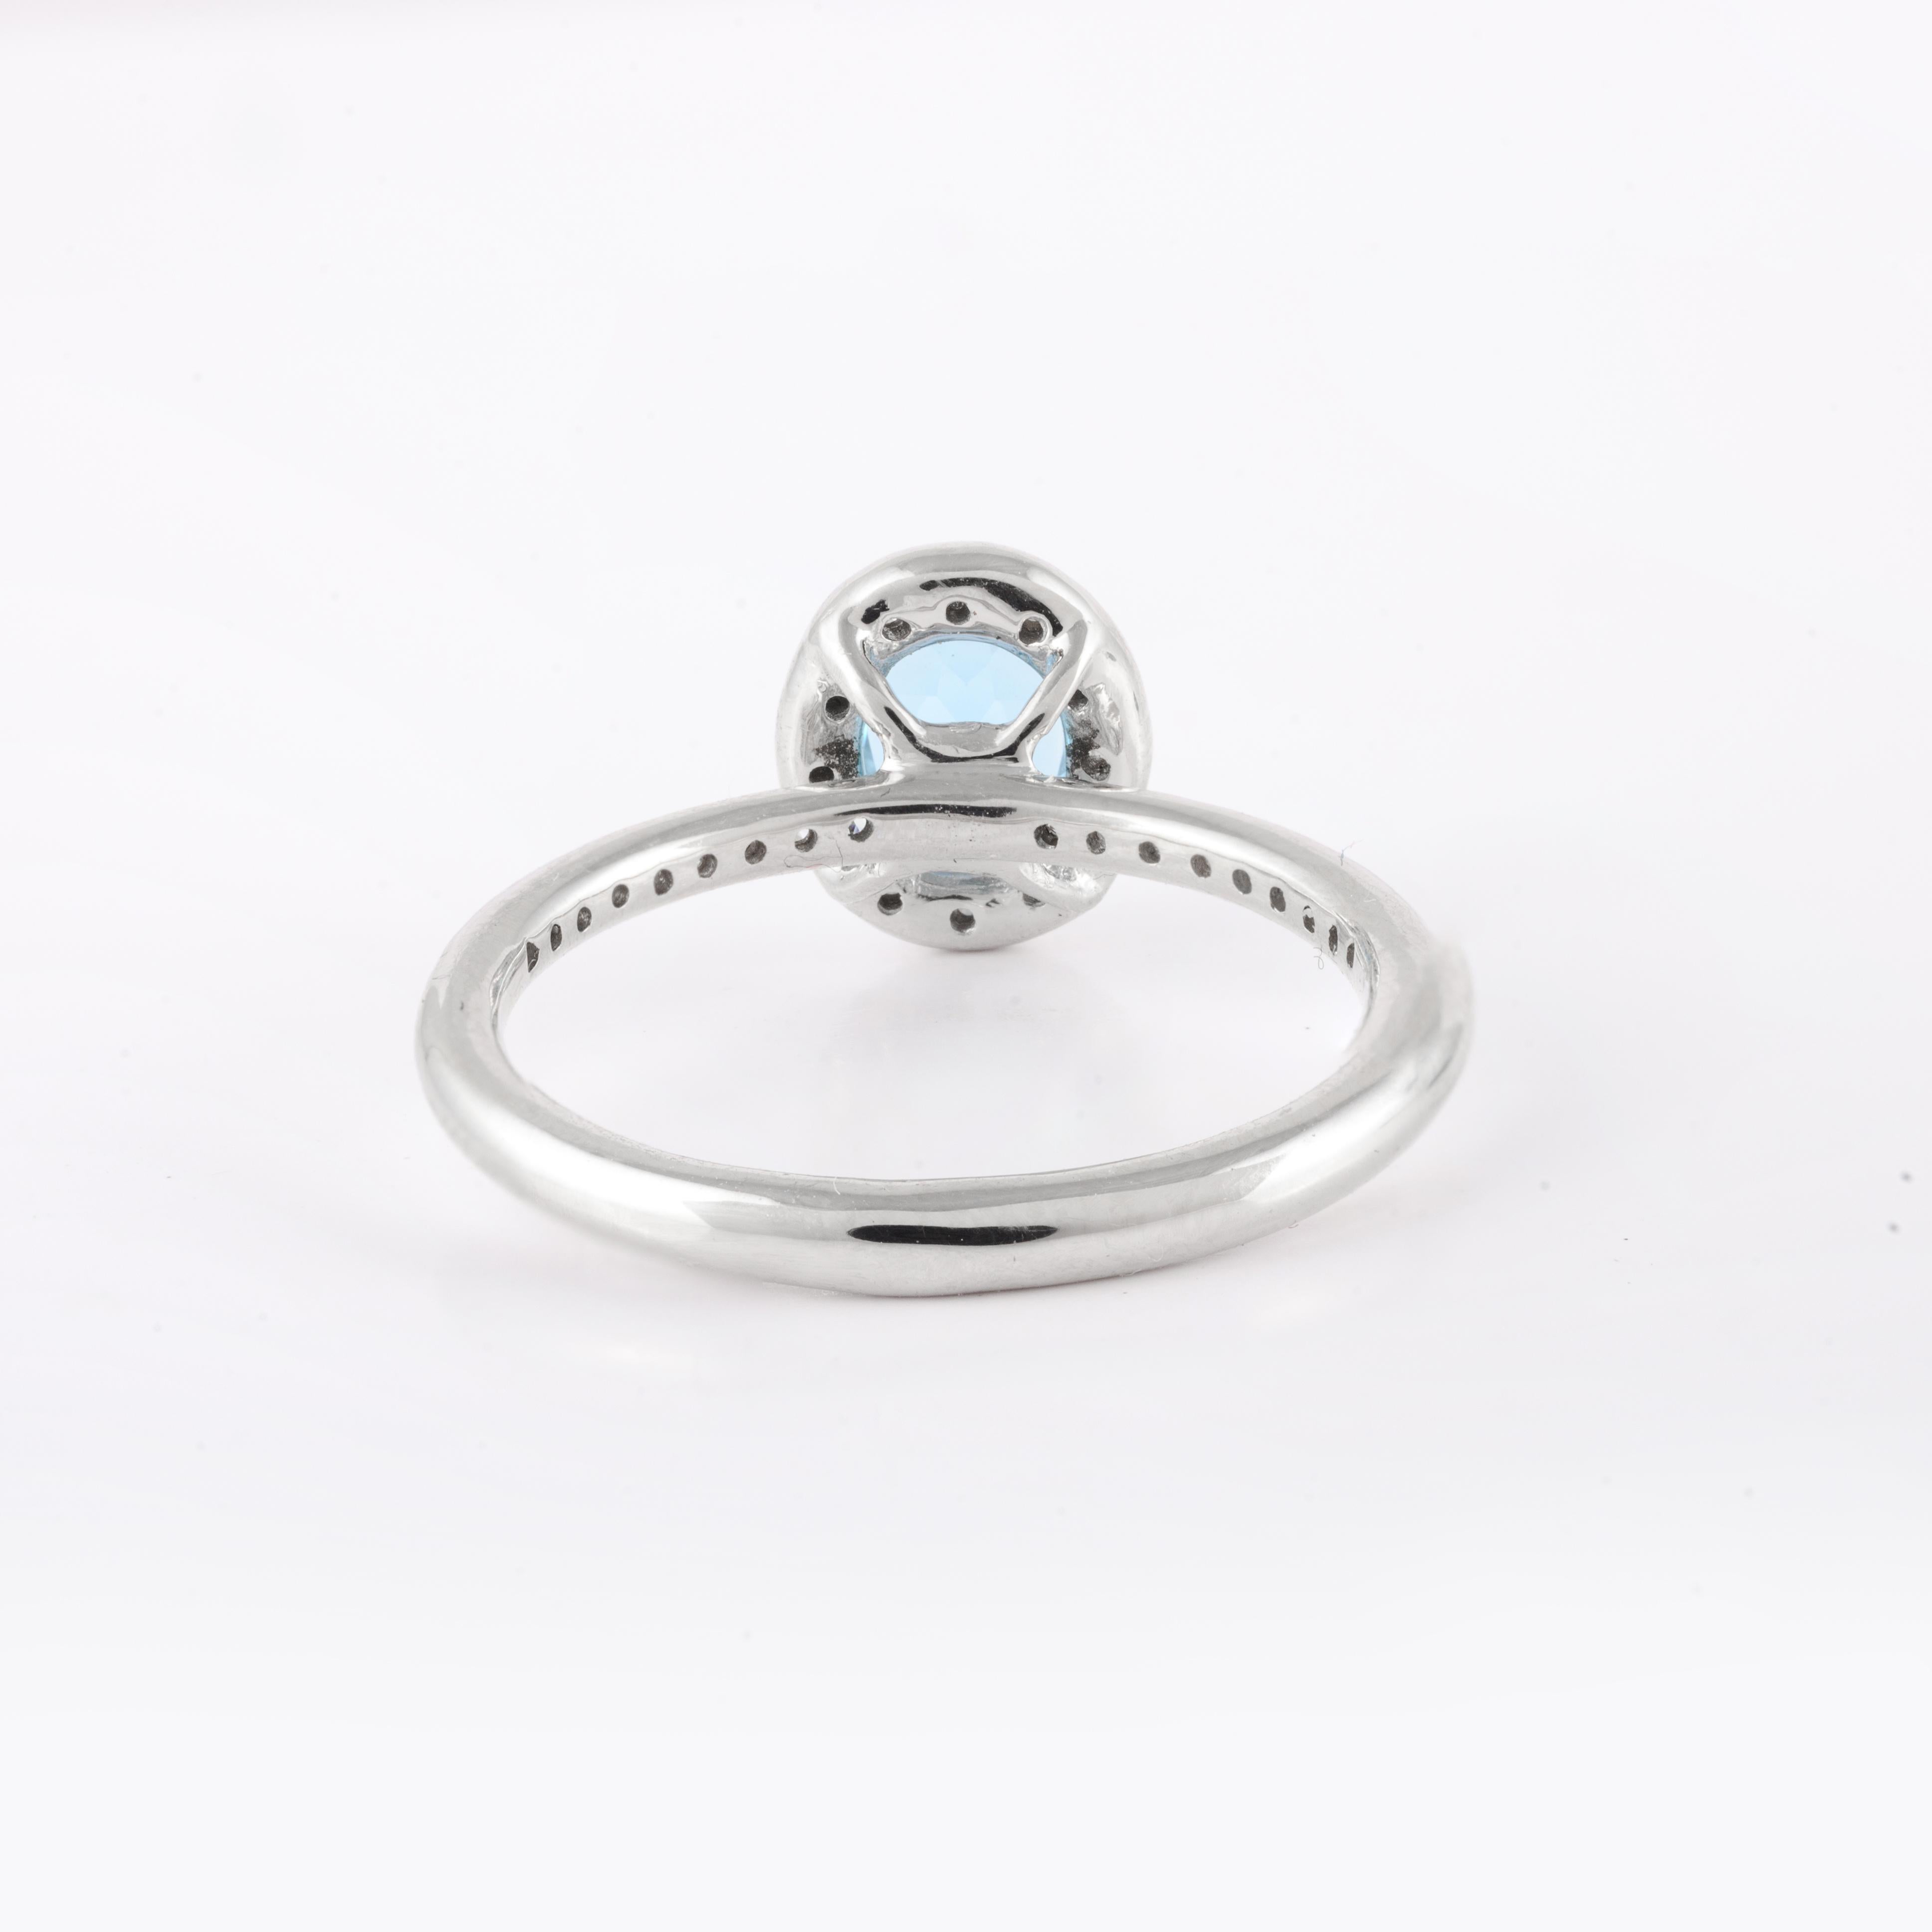 For Sale:  Real 14kt Solid White Gold Halo Diamond And Oval Cut Blue Topaz Ring For Her 6